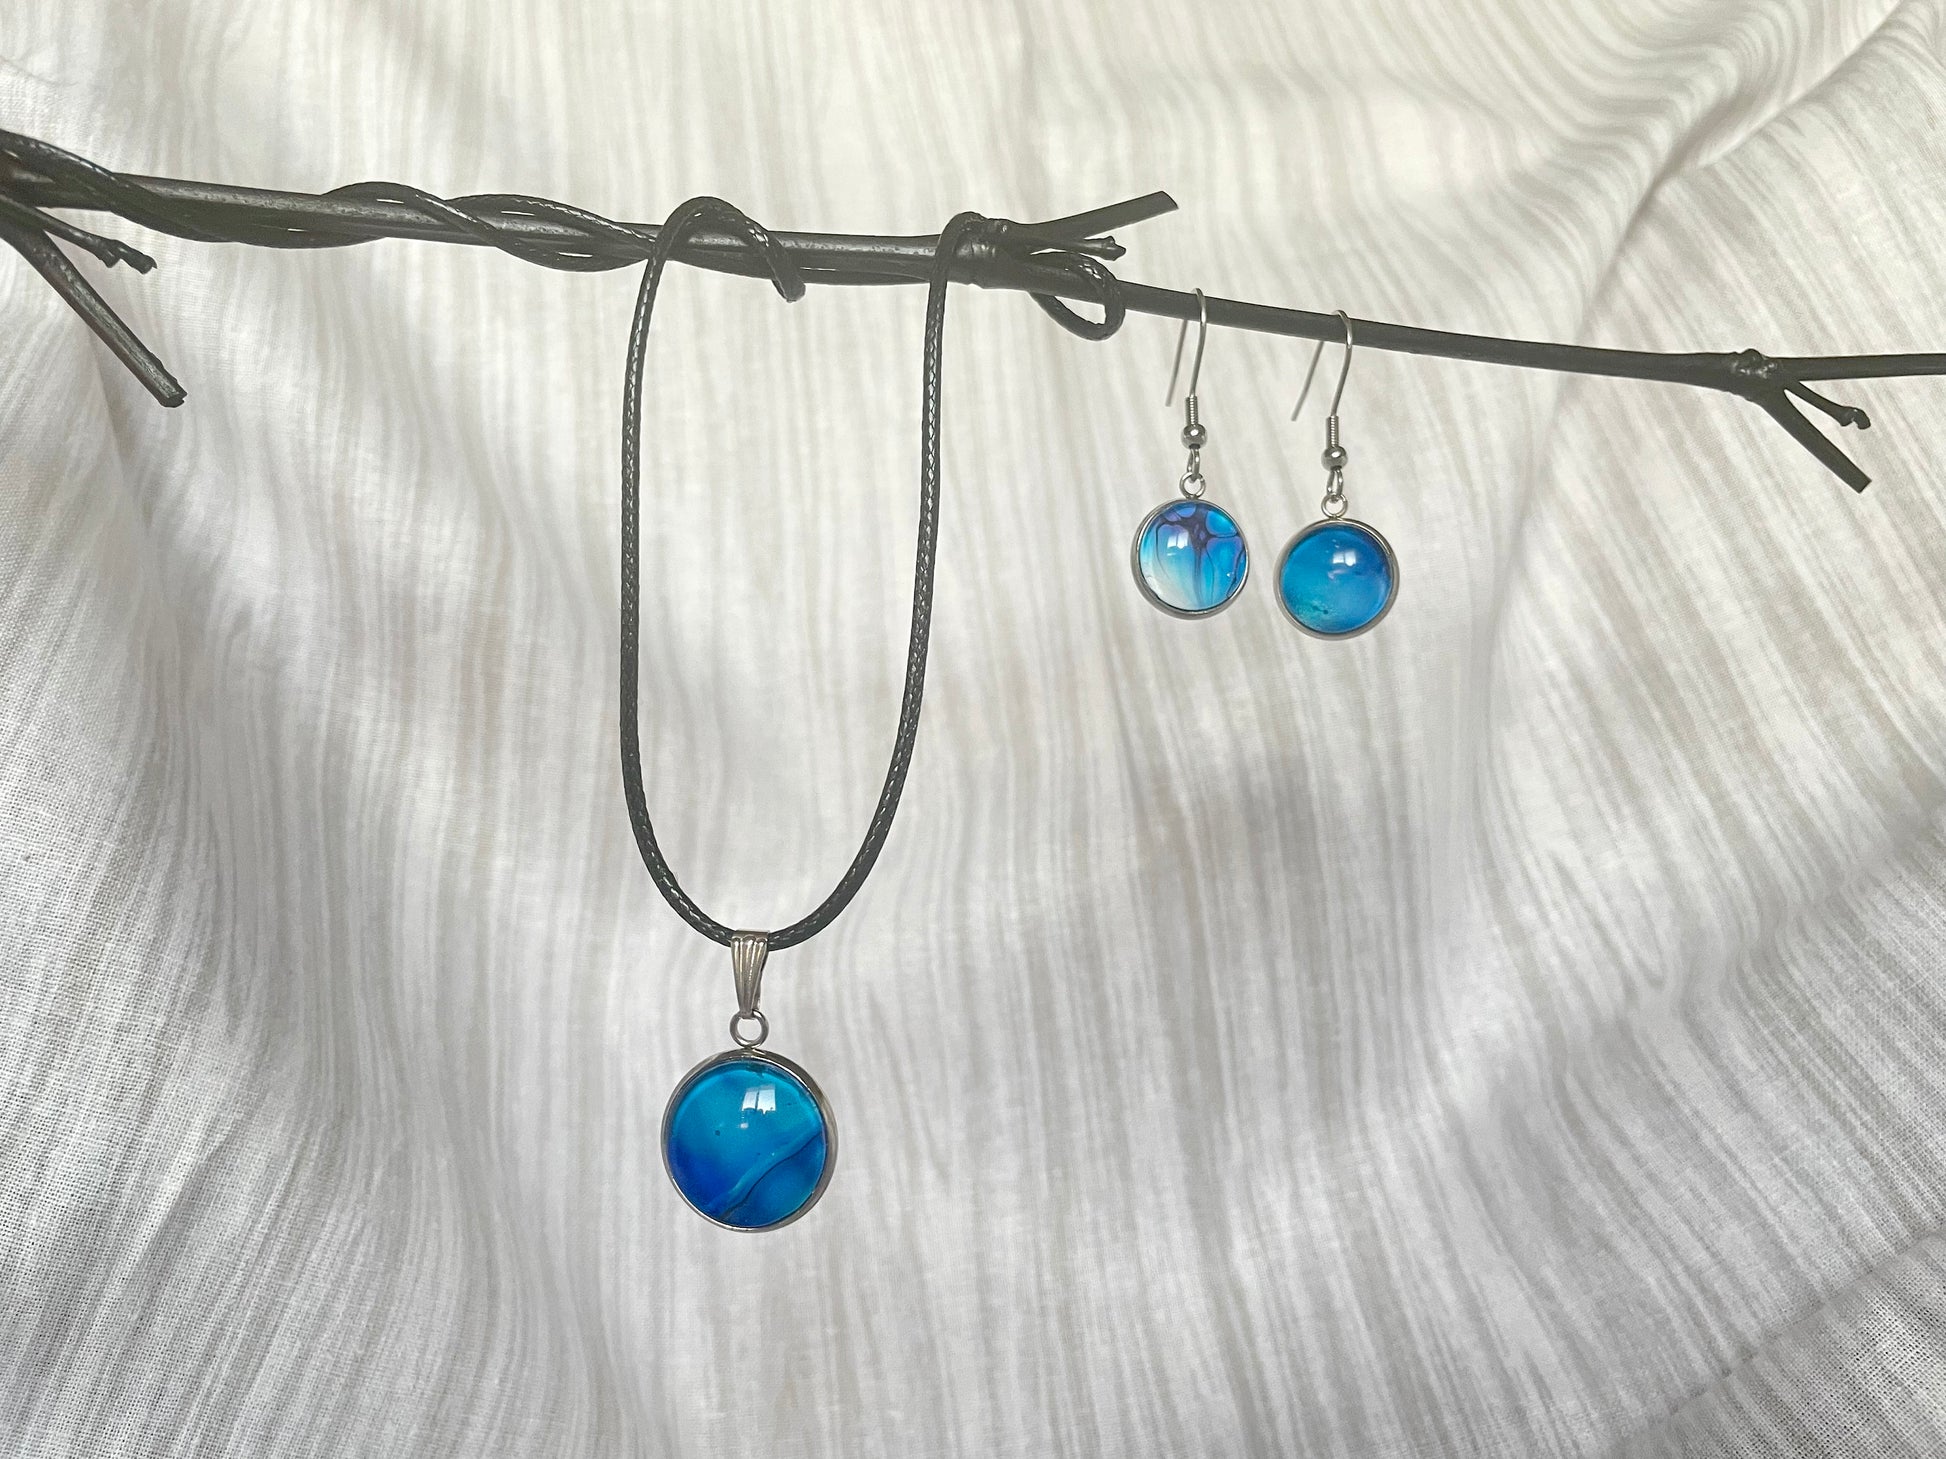 Pendant necklace and dangle earrings handmade jewelry set in multi-colored acrylic art pour in beautiful blues